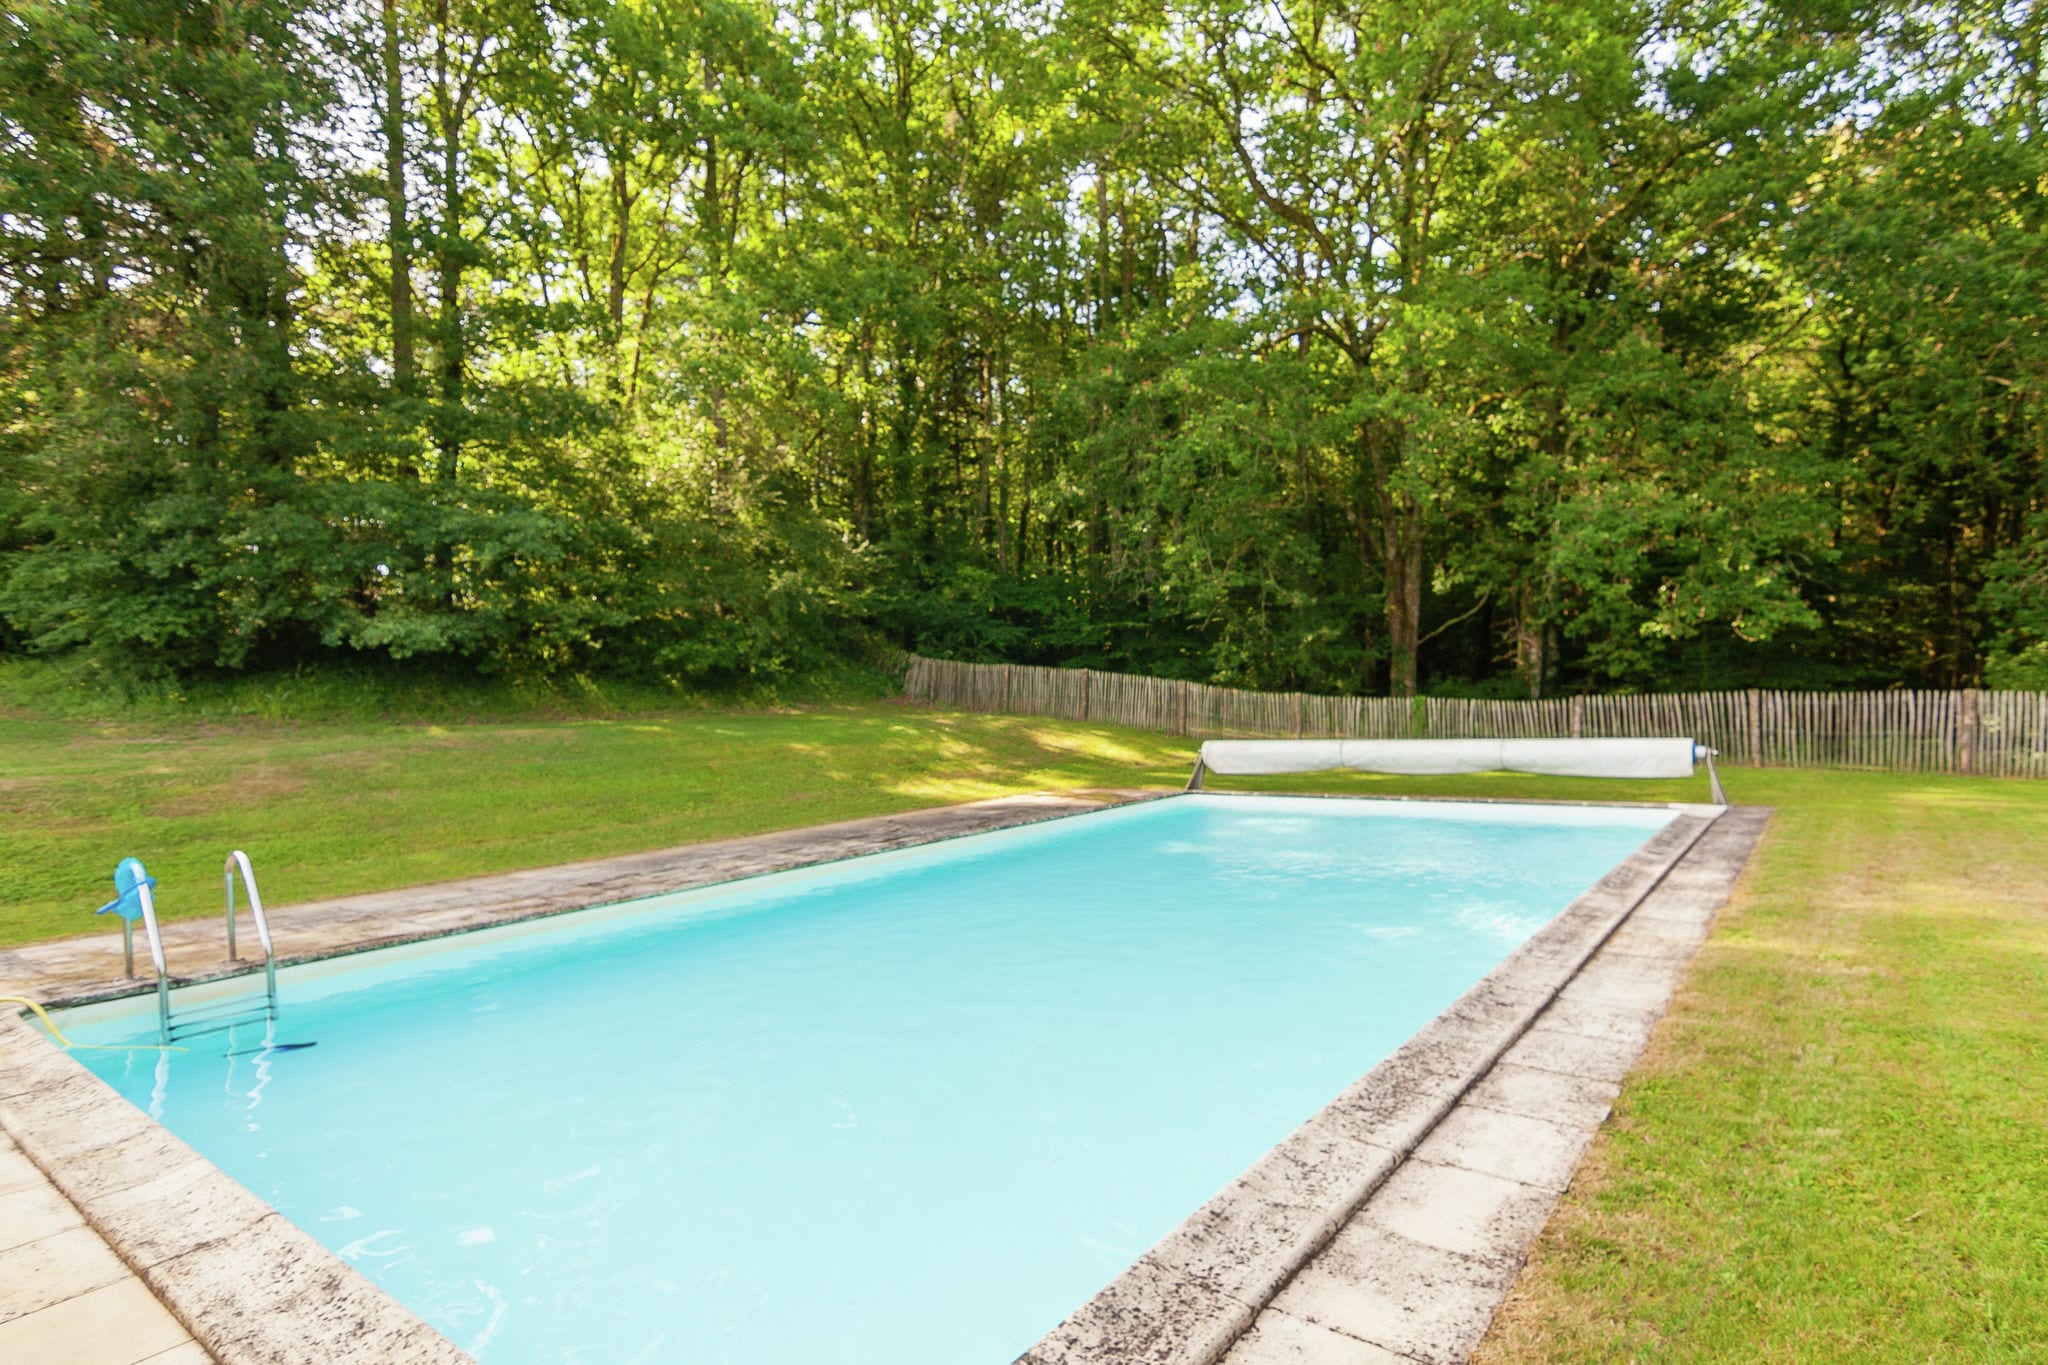 Impressive, restored farmhouse with private pool, surrounded by woods.

